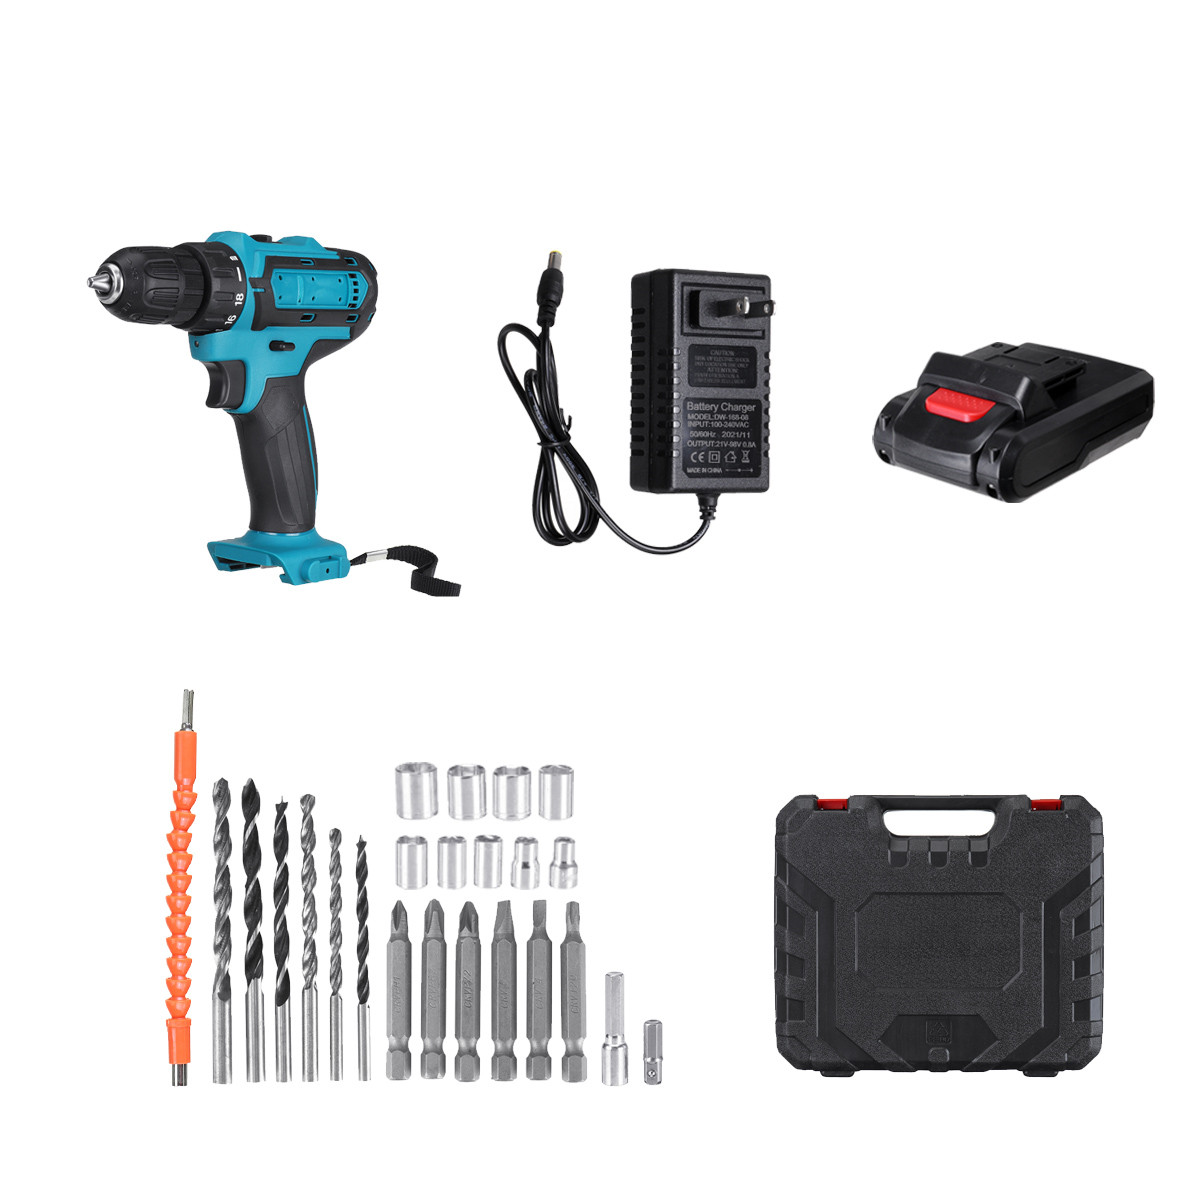 Find 2000rpm 38Nm 21V Lithium Electric Impact Hammer Drill Wood Drilling Screwdrivers with Battery for Sale on Gipsybee.com with cryptocurrencies